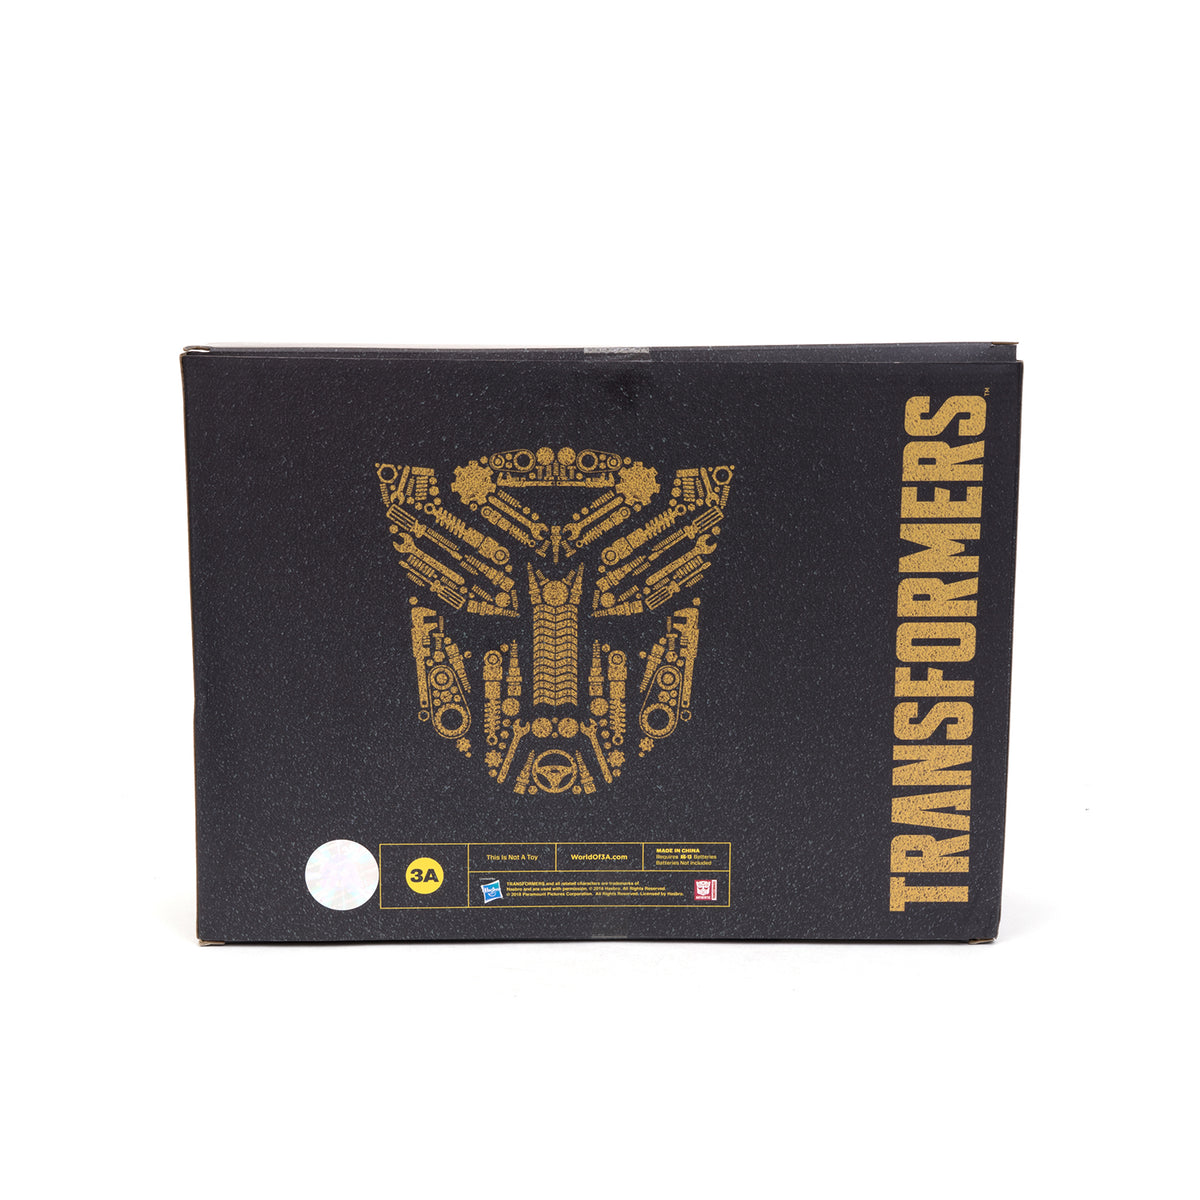 threeA Transformers Bumblebee DLX Scale Collectible Series - Concrete